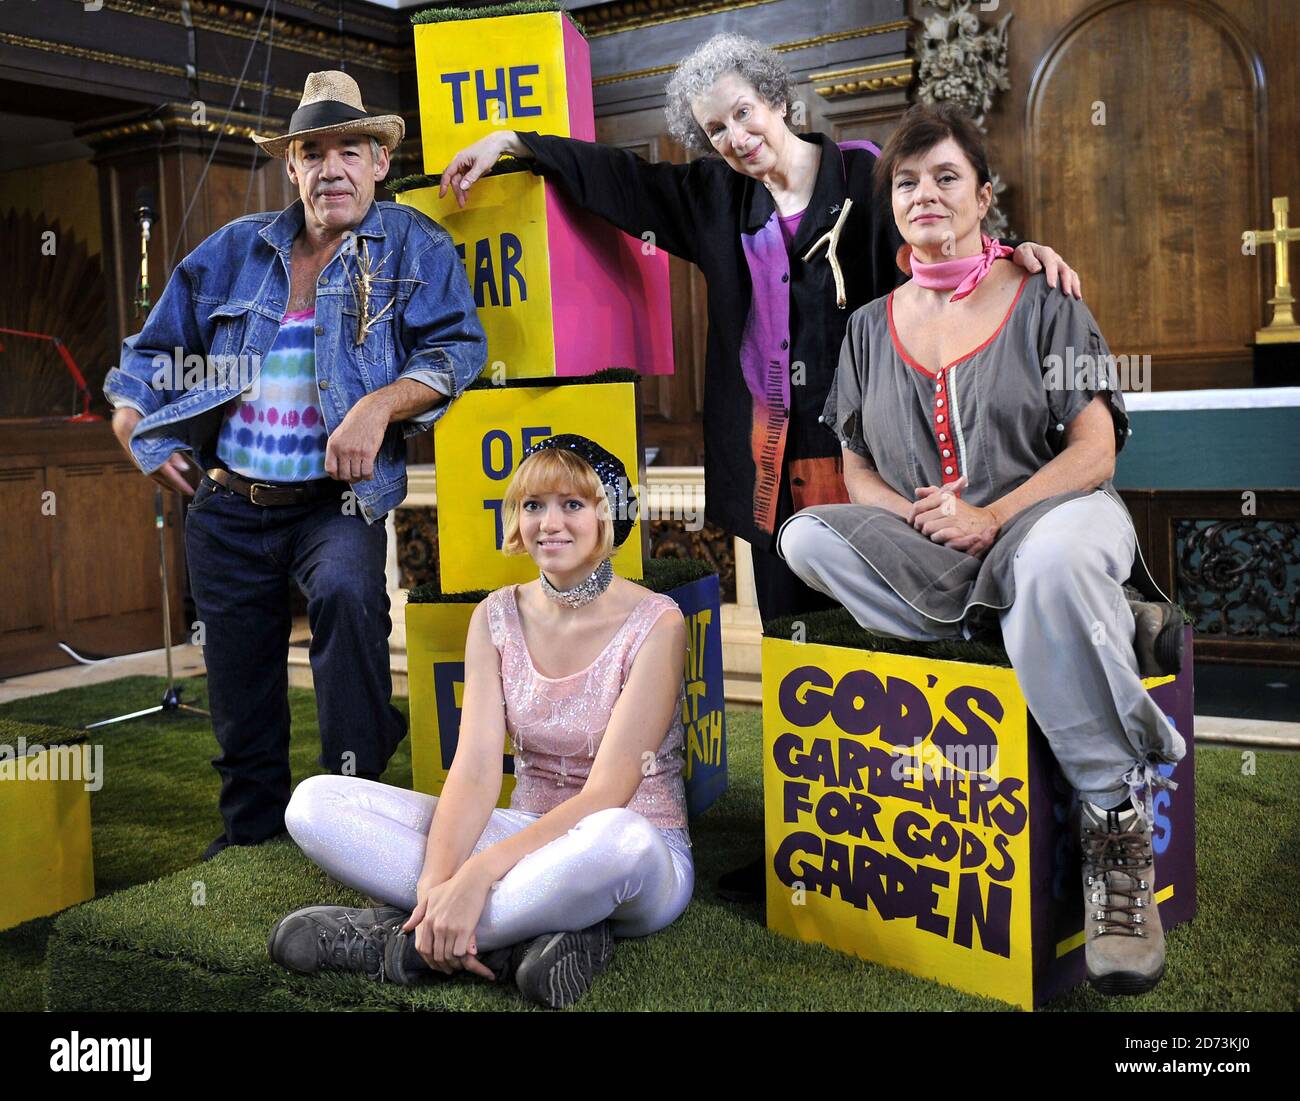 (l-r) Roger Lloyd Pack, Lucy Briggs-Owen, Margaret Atwood and Diana Quick appearing at a photocall to promote The Year Of The Flood Event, a book launch and dramatic presentation of her novel taking place at St James's Church in central London. Stock Photo